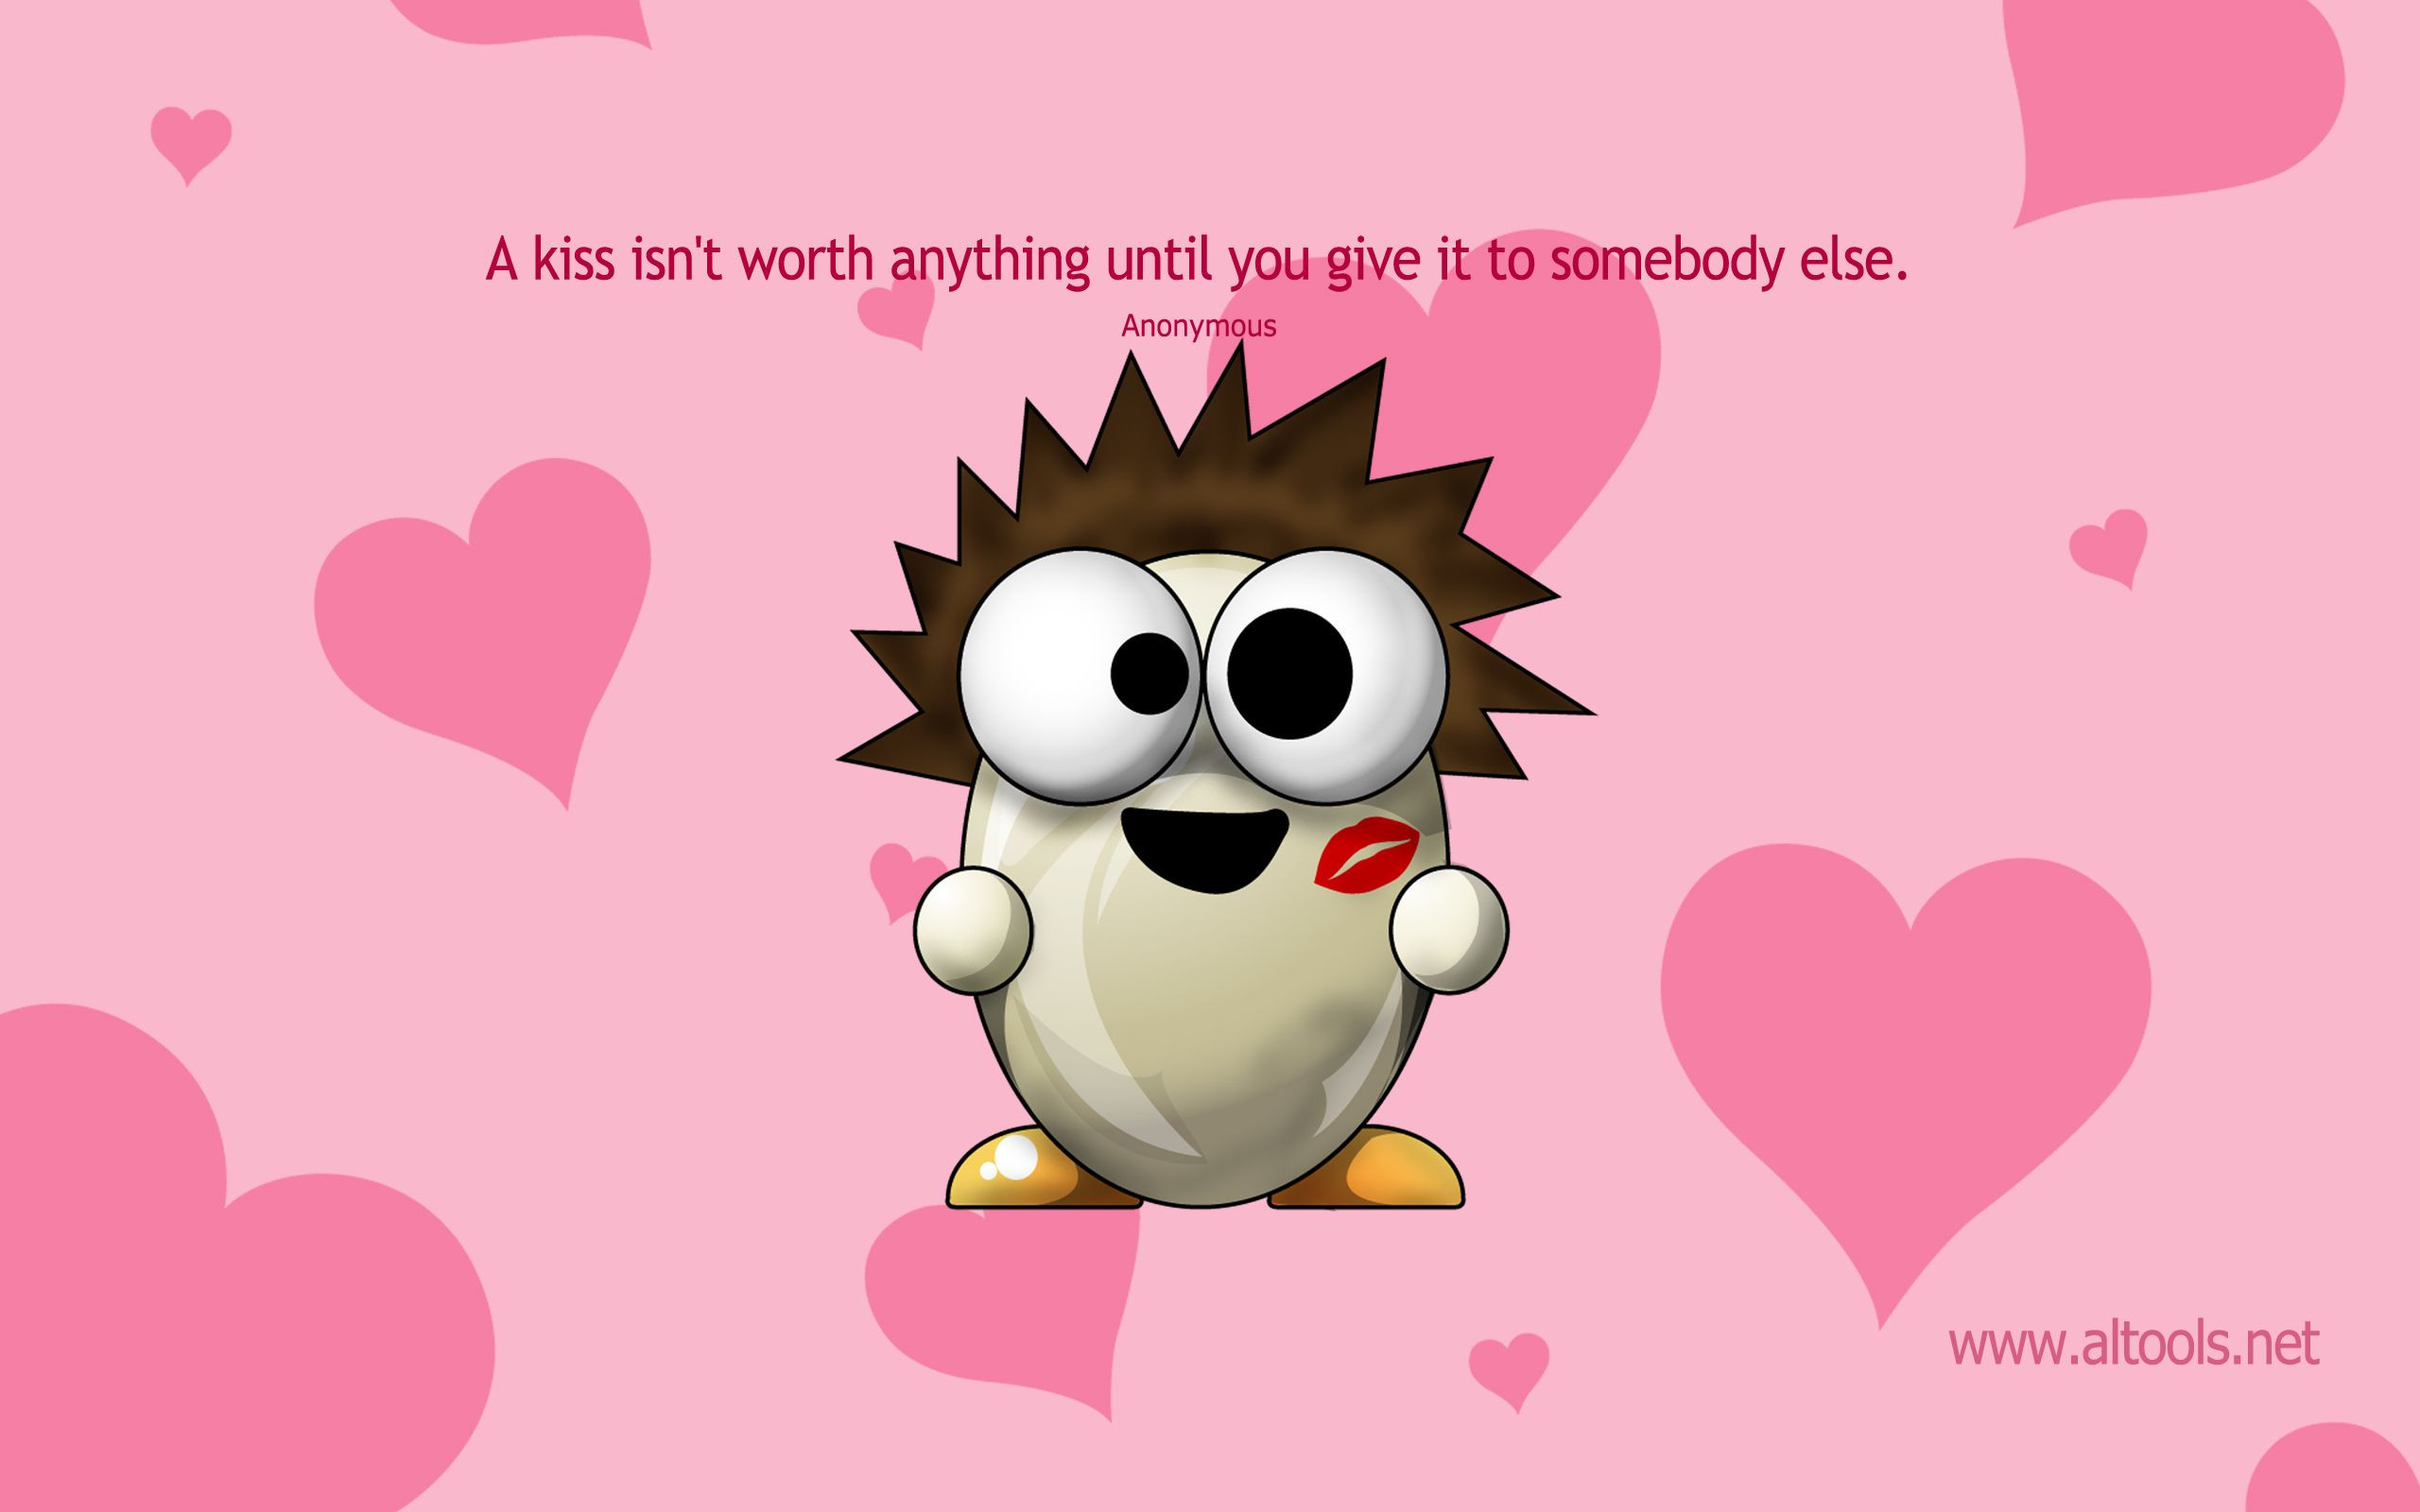 Kids Valentines Quotes
 Cute Sayings For Valentine s Day For Kids